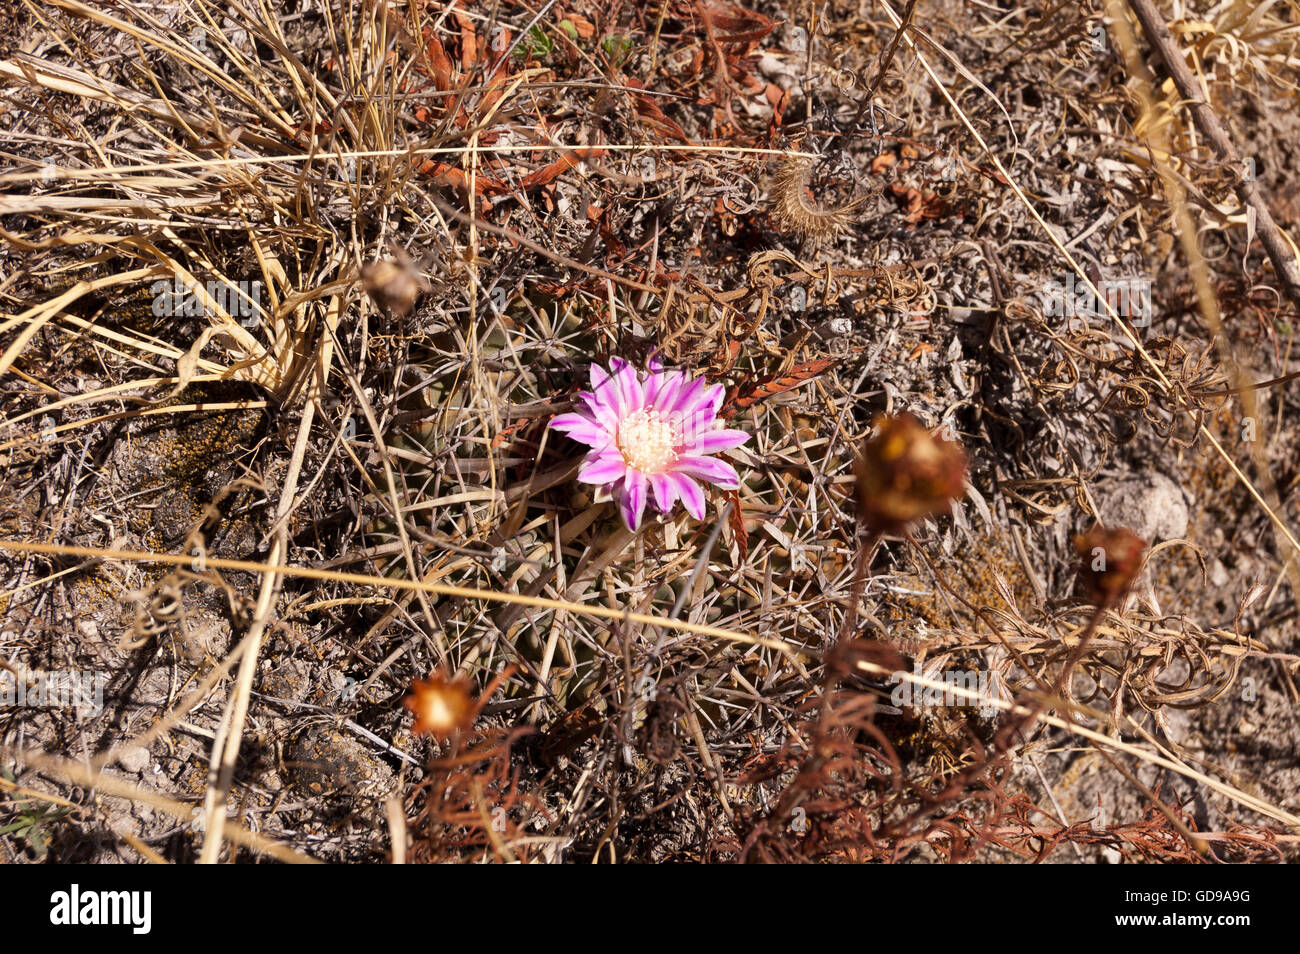 Wild Stenocactus obvallatus growing hidden in the dry grass in Central Mexico Stock Photo